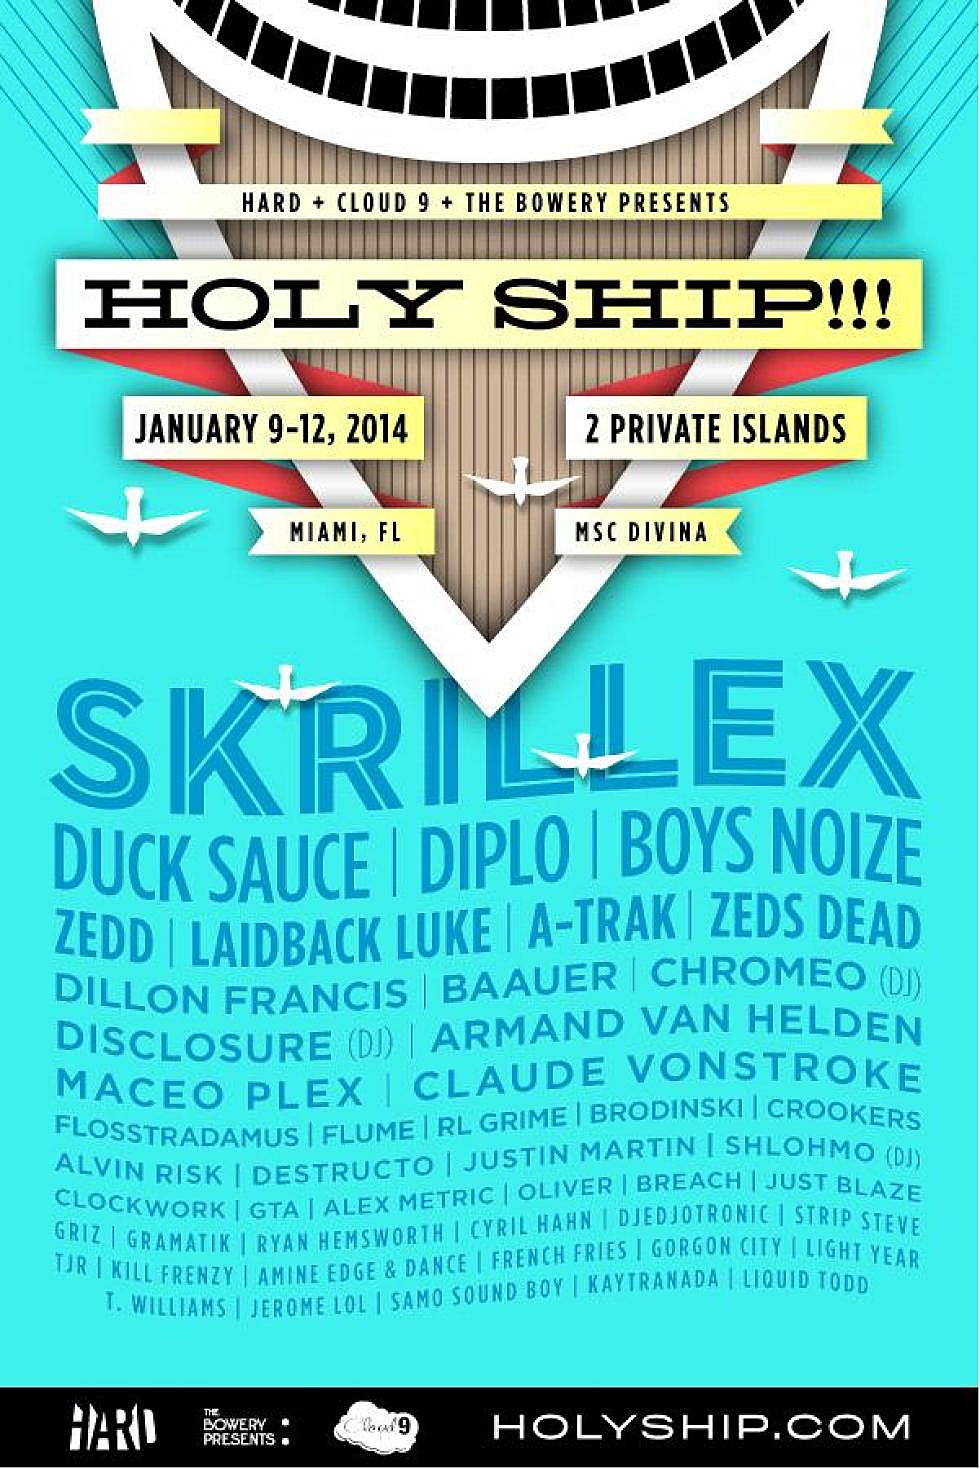 HOLY SHIP!!! artists announced &#038; new ship revealed